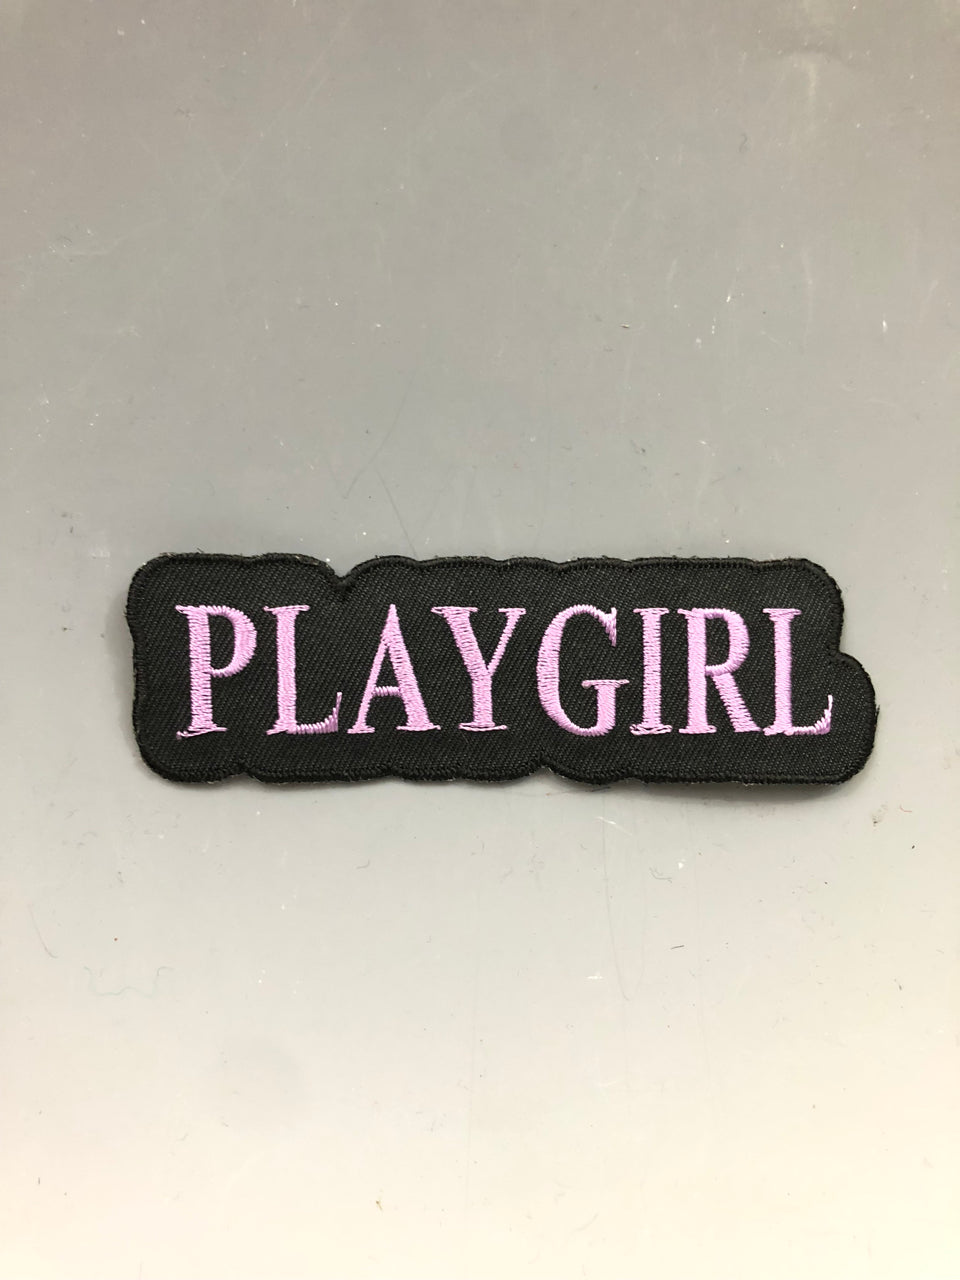 Playgirl Iron-On Patch